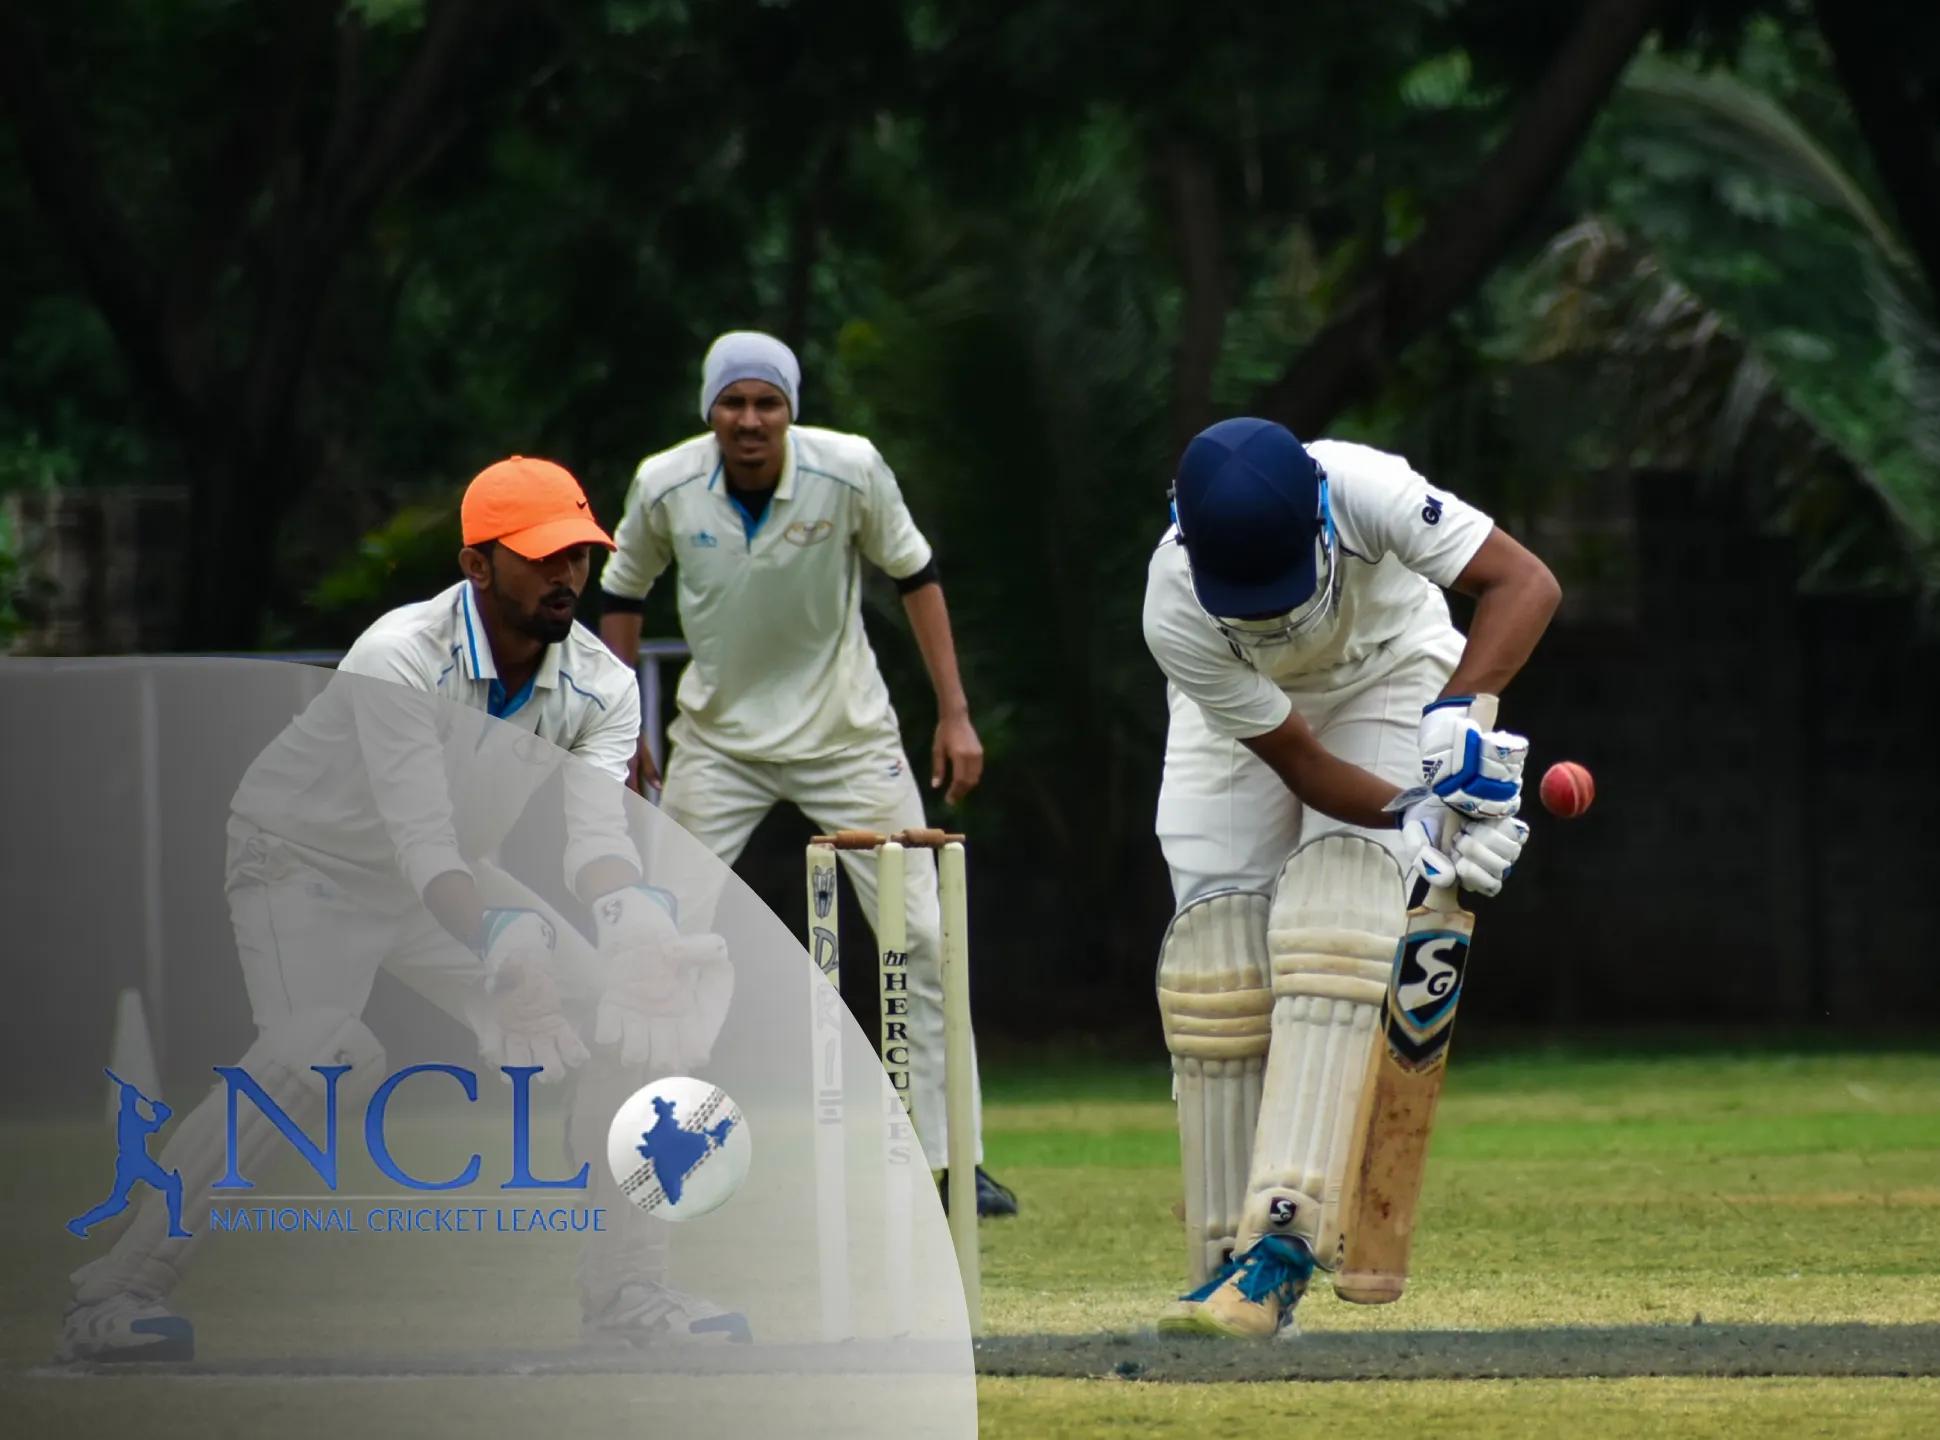 NCL is a leading cricket tournament, try placing a bet.